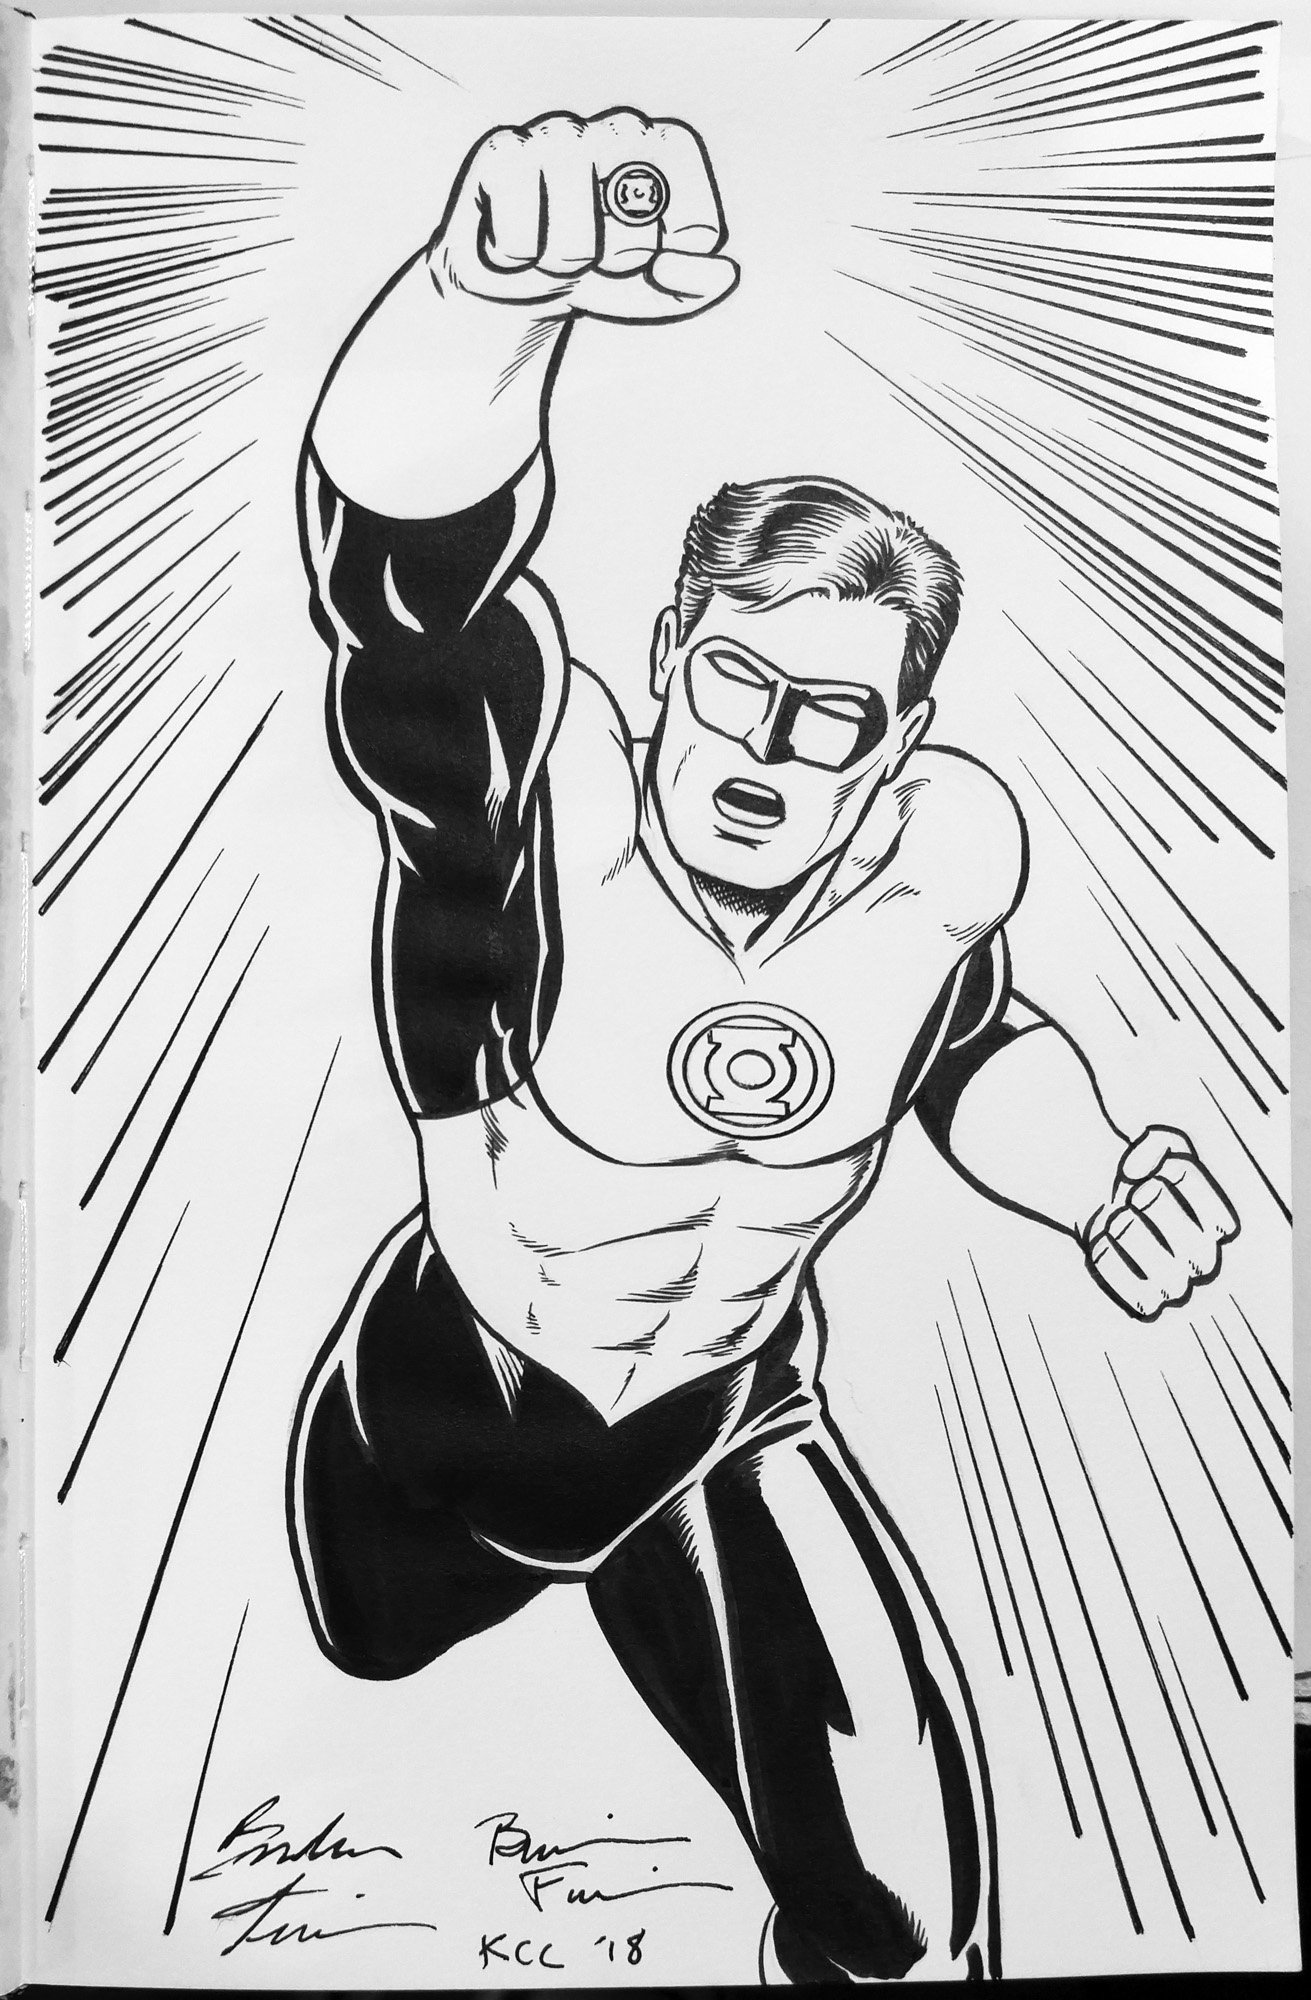 GREEN LANTERN!, in Brendon and Brian Fraim's 2018 Convention Sketches